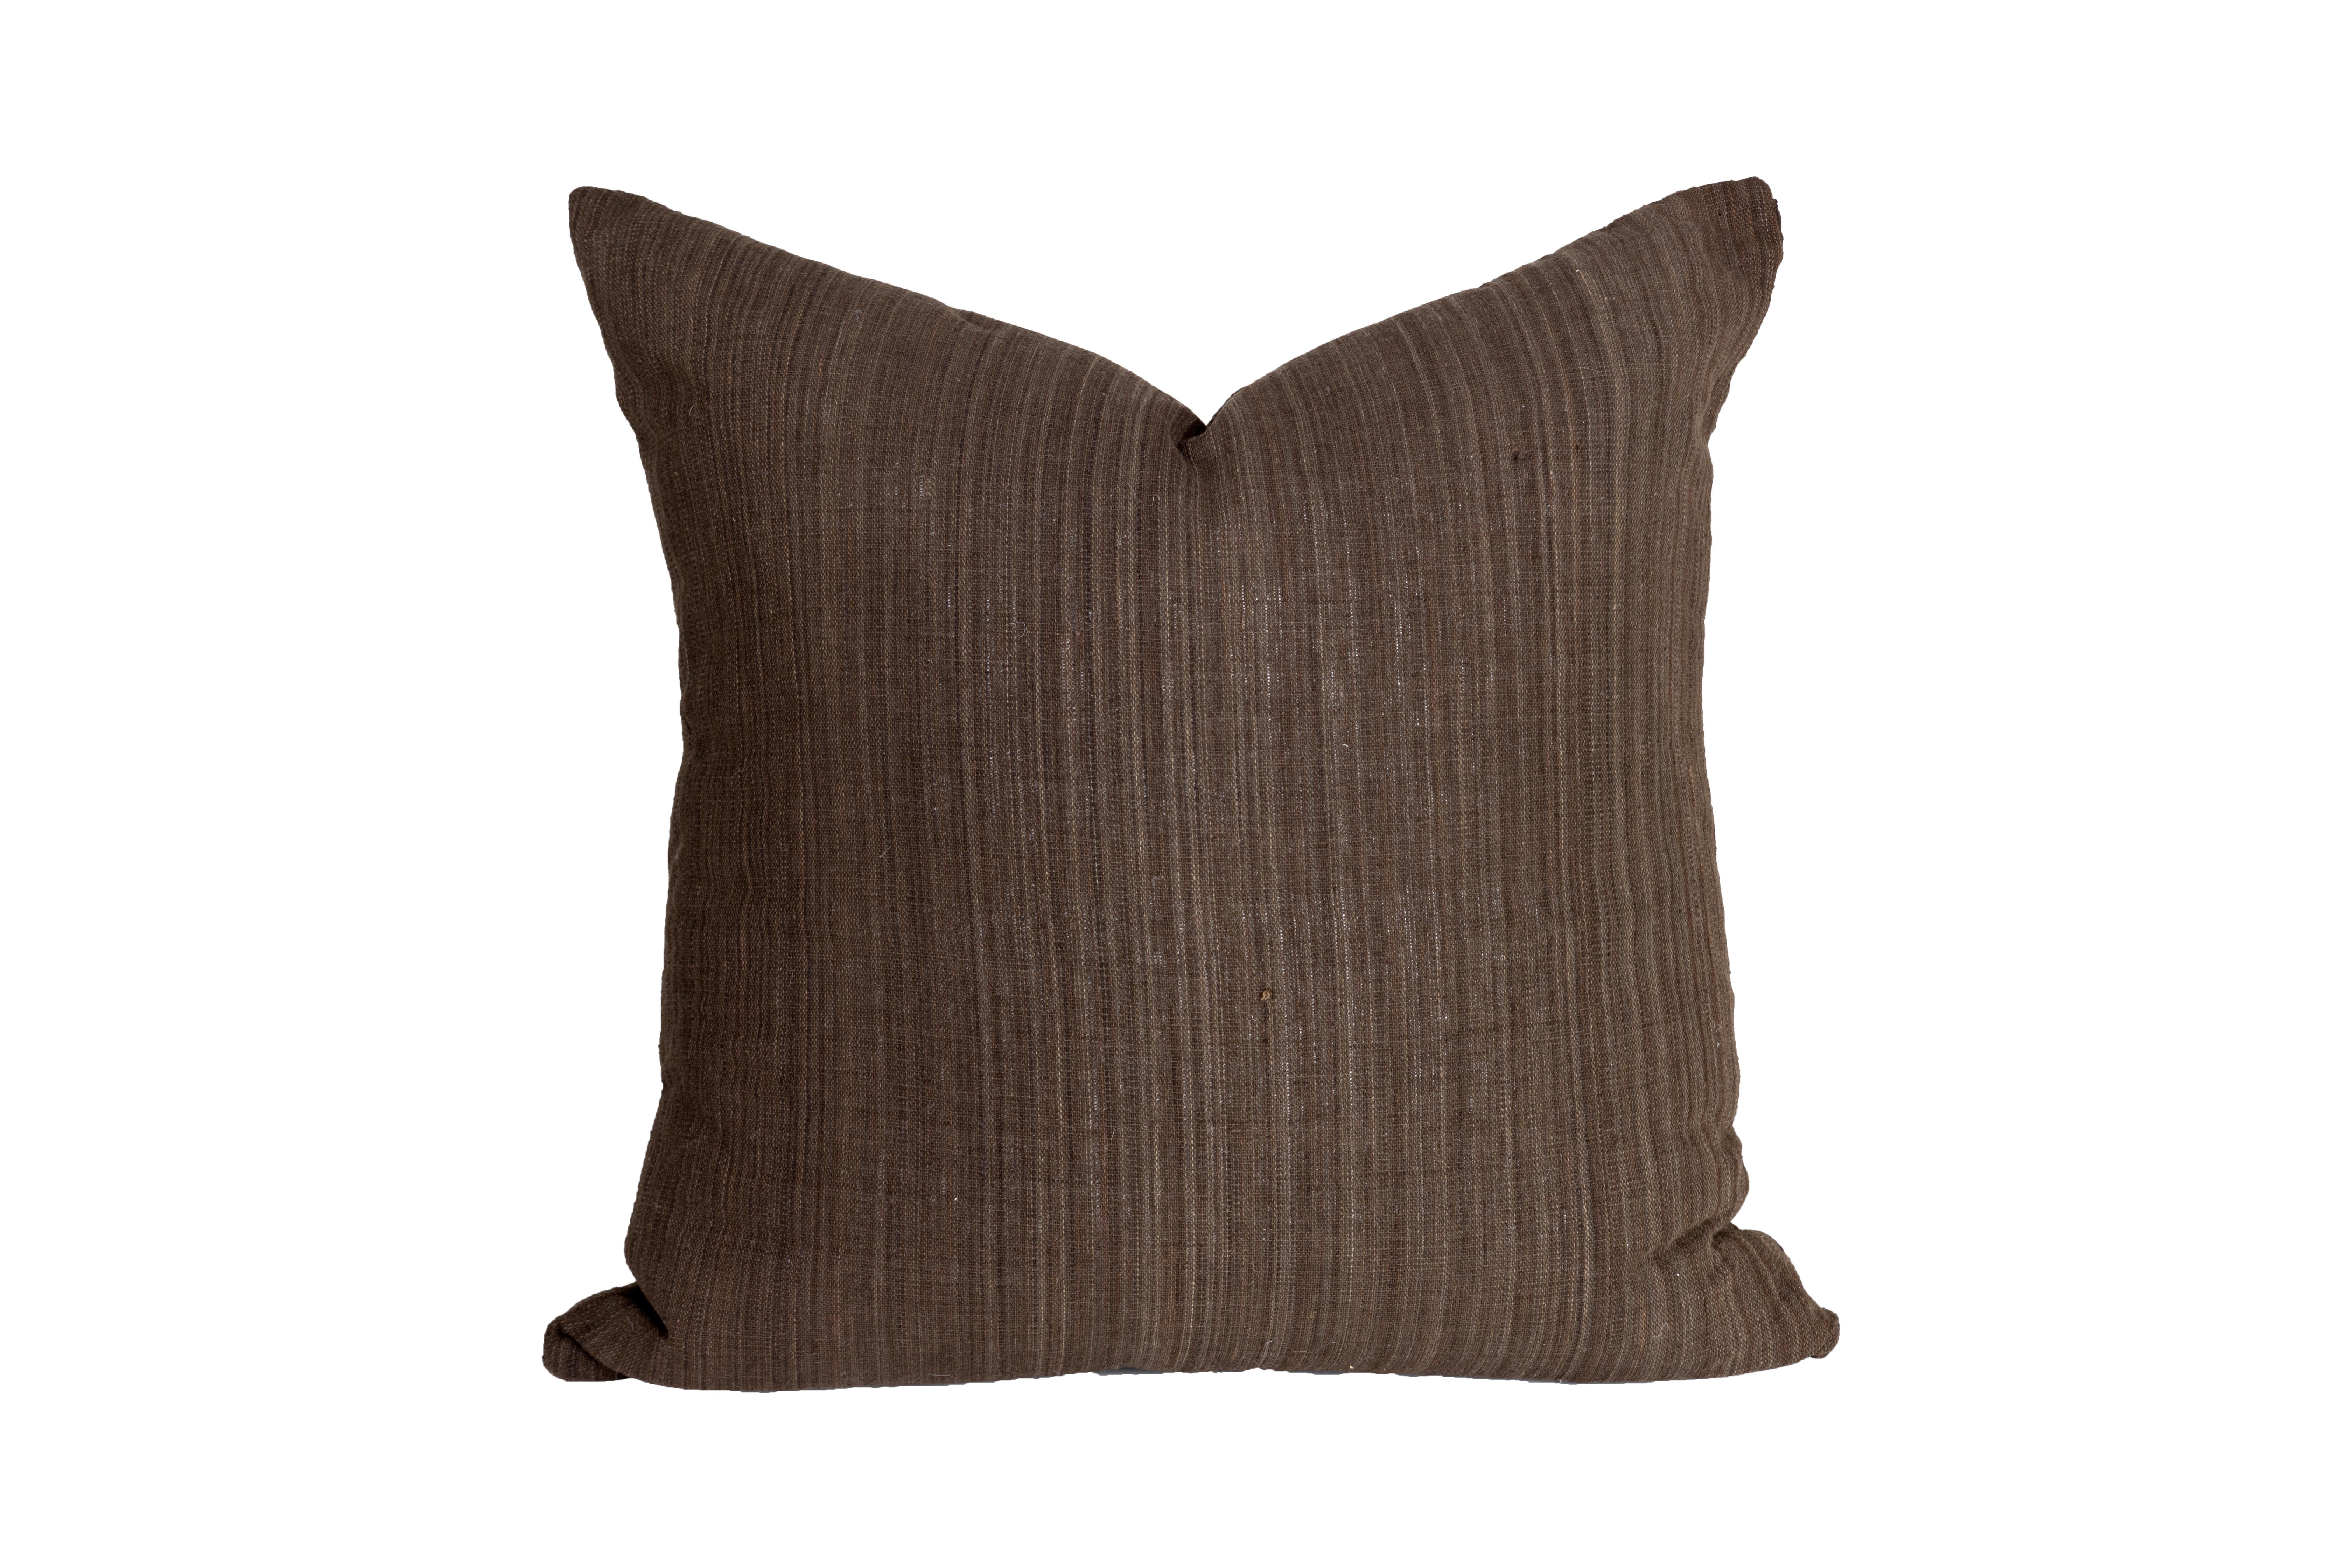 The Brown Bark Vintage Hmong Striped Textiles Down Filled Pillow is a great addition to any room. It's a muted, natural color that pairs well with almost any decor and comes in a soft linen brown textile texture that adds texture to your home. Comes